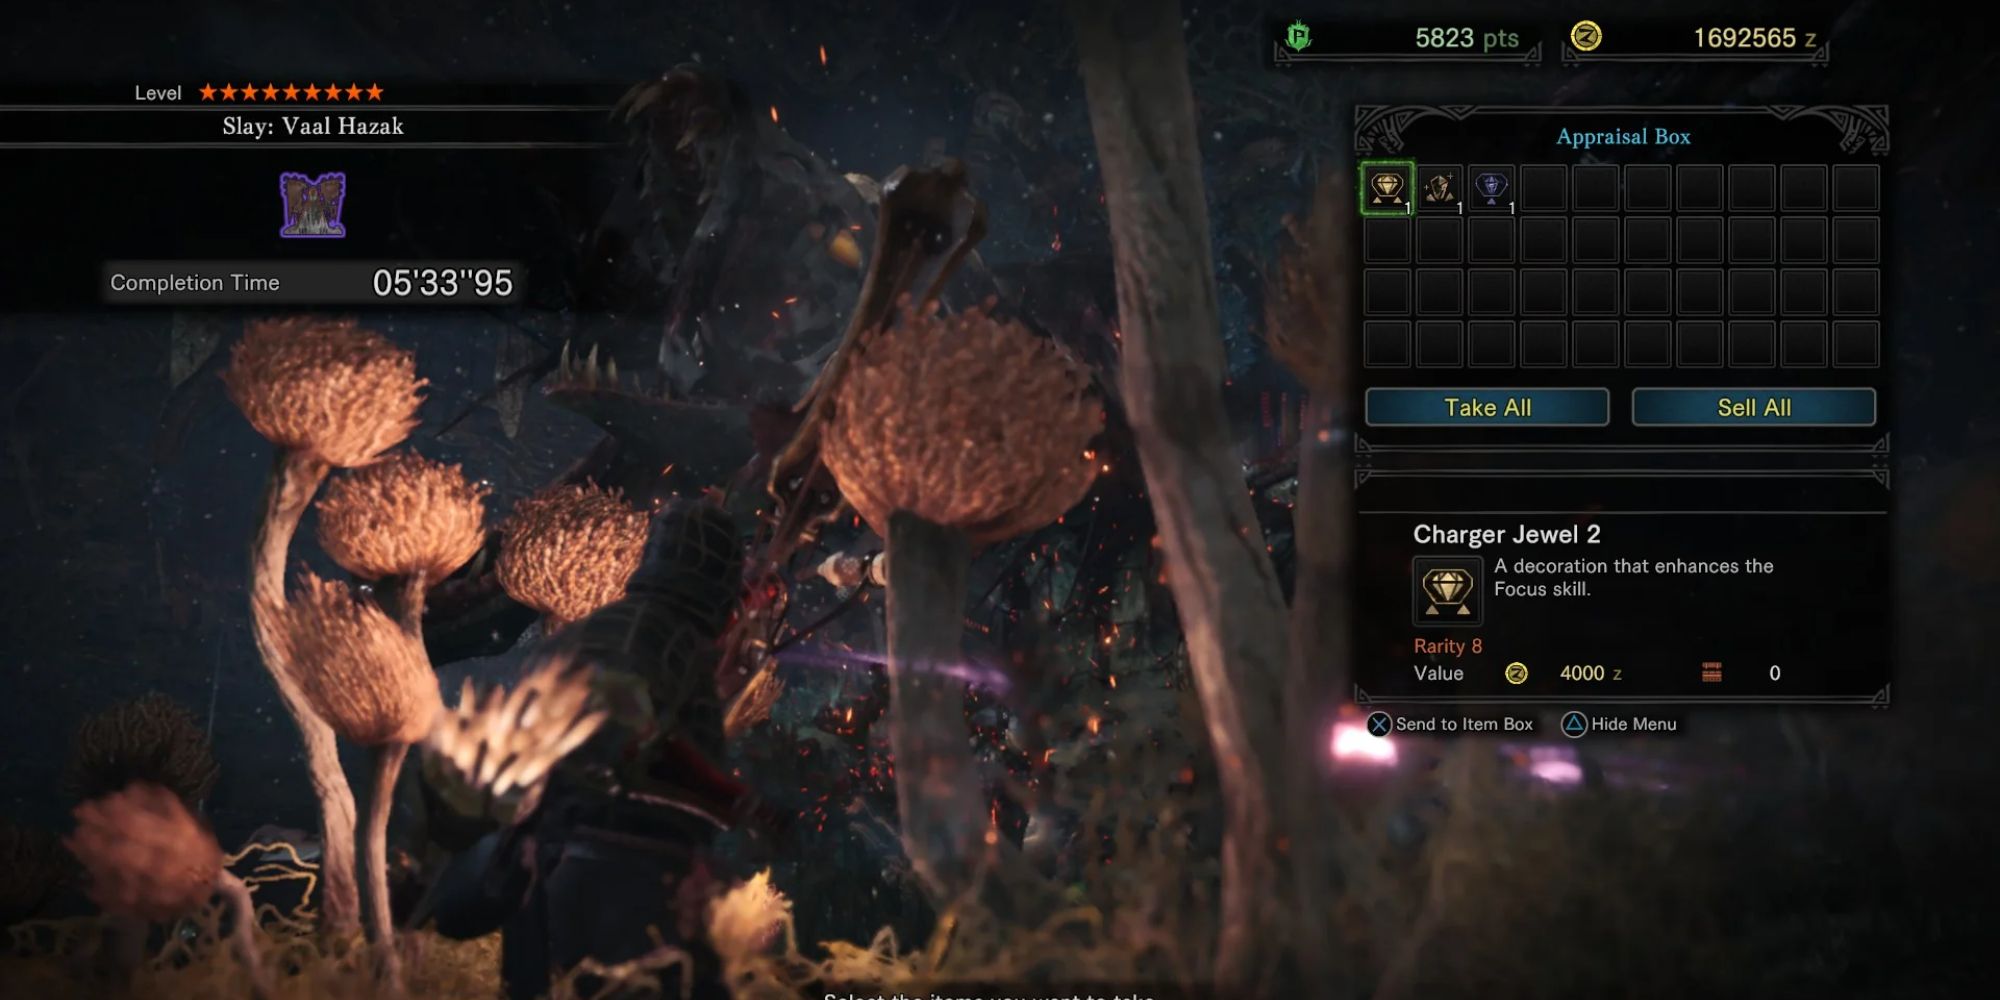 A Charger Jewel 2 in the appraisal box in MHW